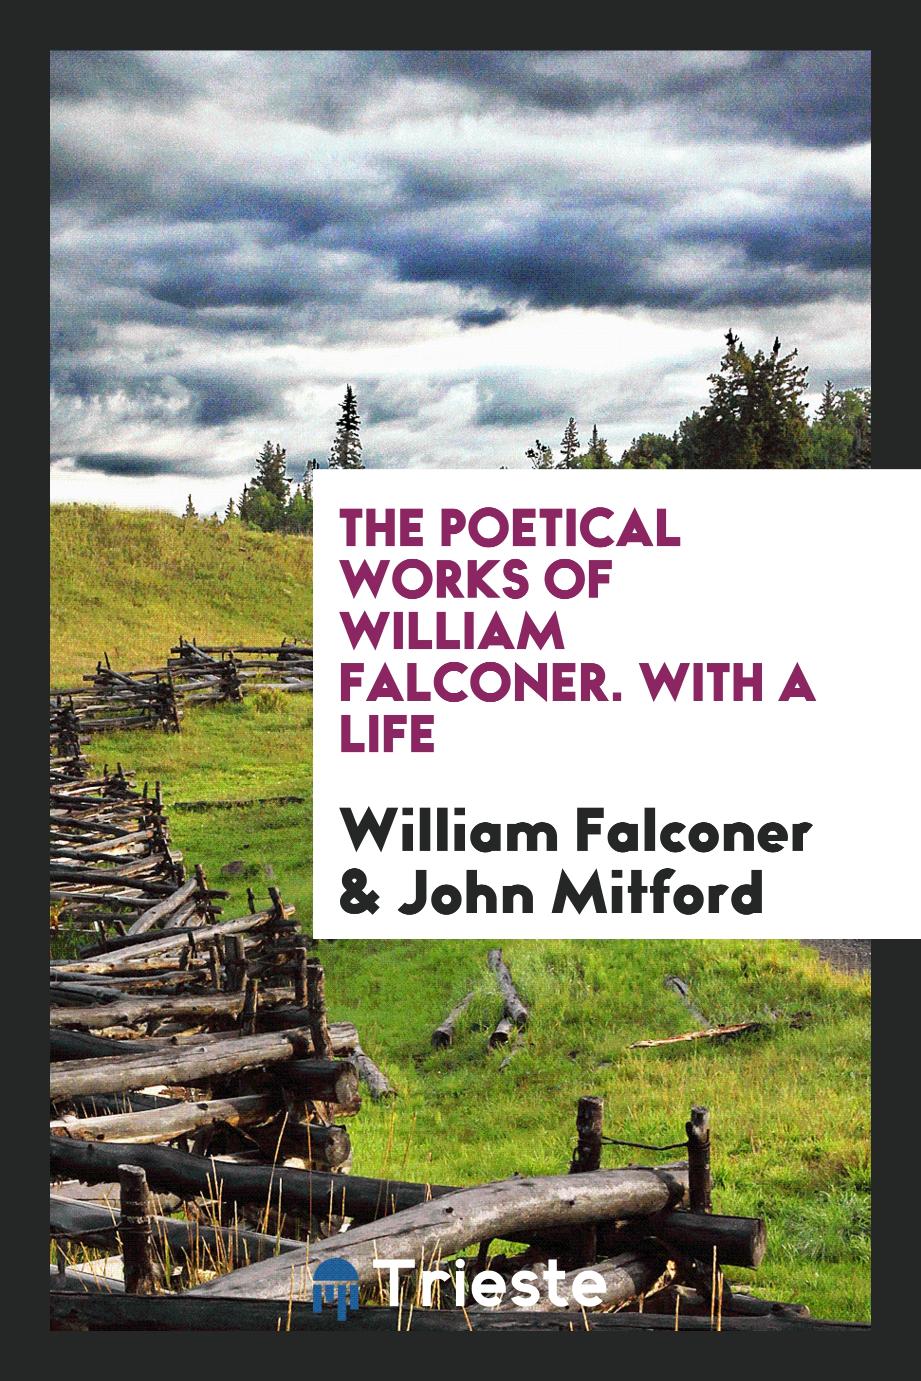 William Falconer, John Mitford - The poetical works of William Falconer. With a life